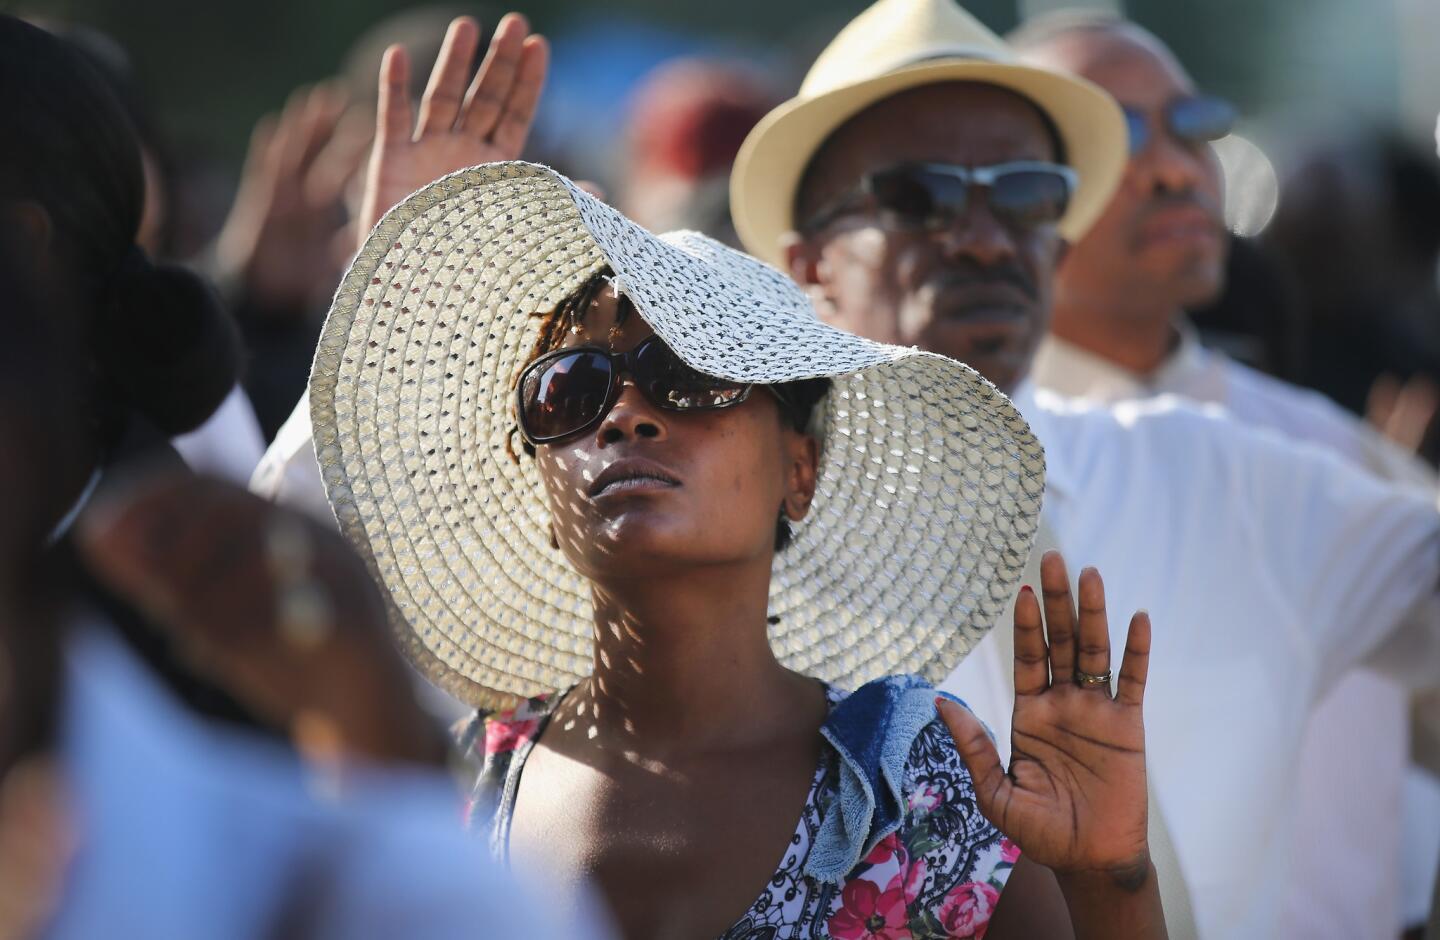 Guests raise their hands as they wait in line to enter the Friendly Temple Missionary Baptist Church for the funeral of Michael Brown.